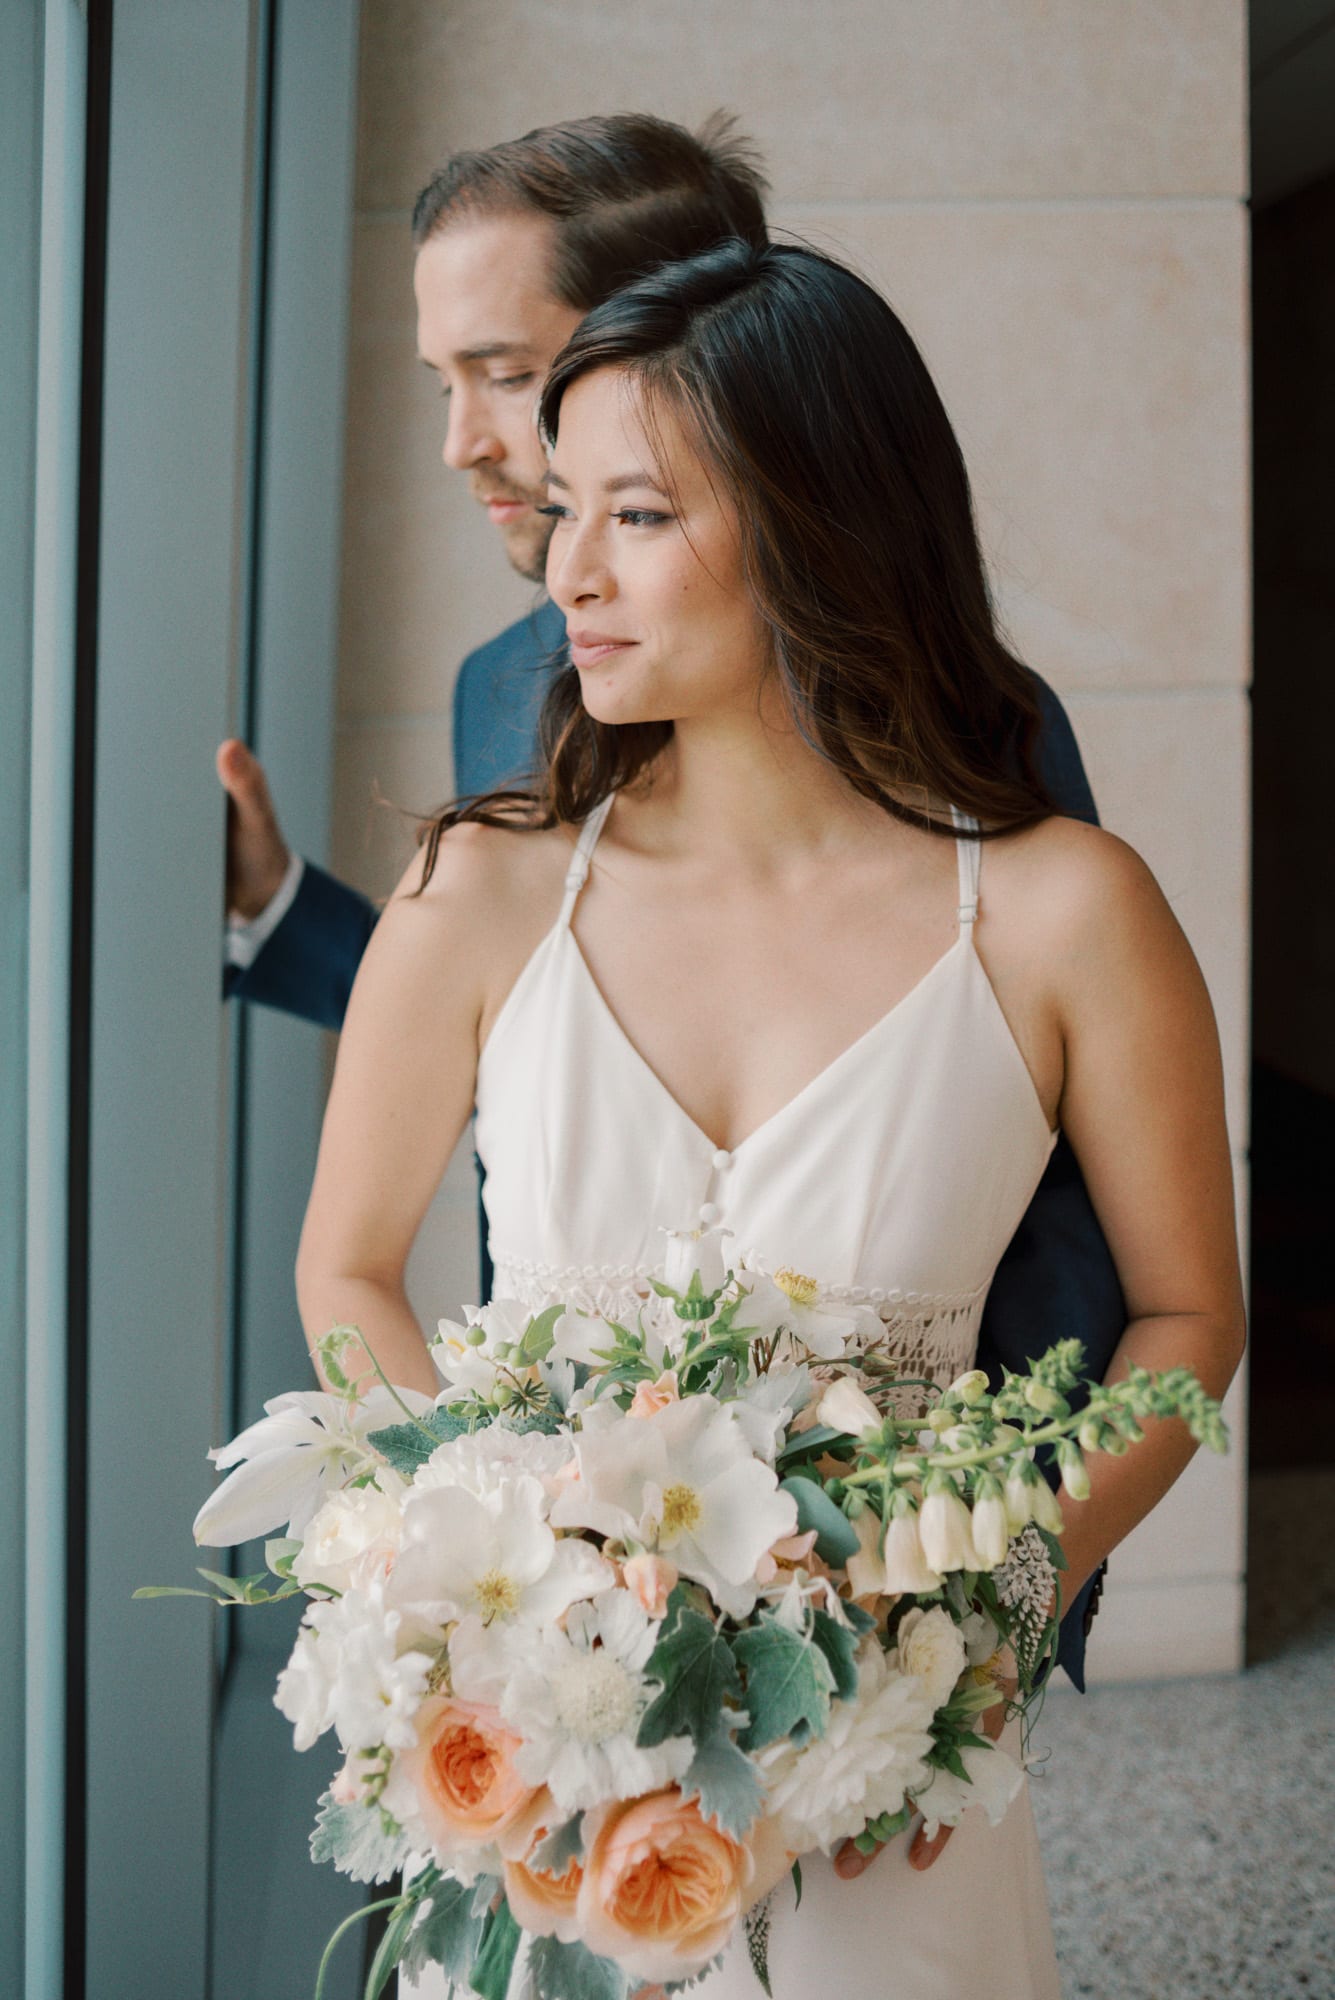 Newlyweds look out a window to the water while holding the white and pink bouquet